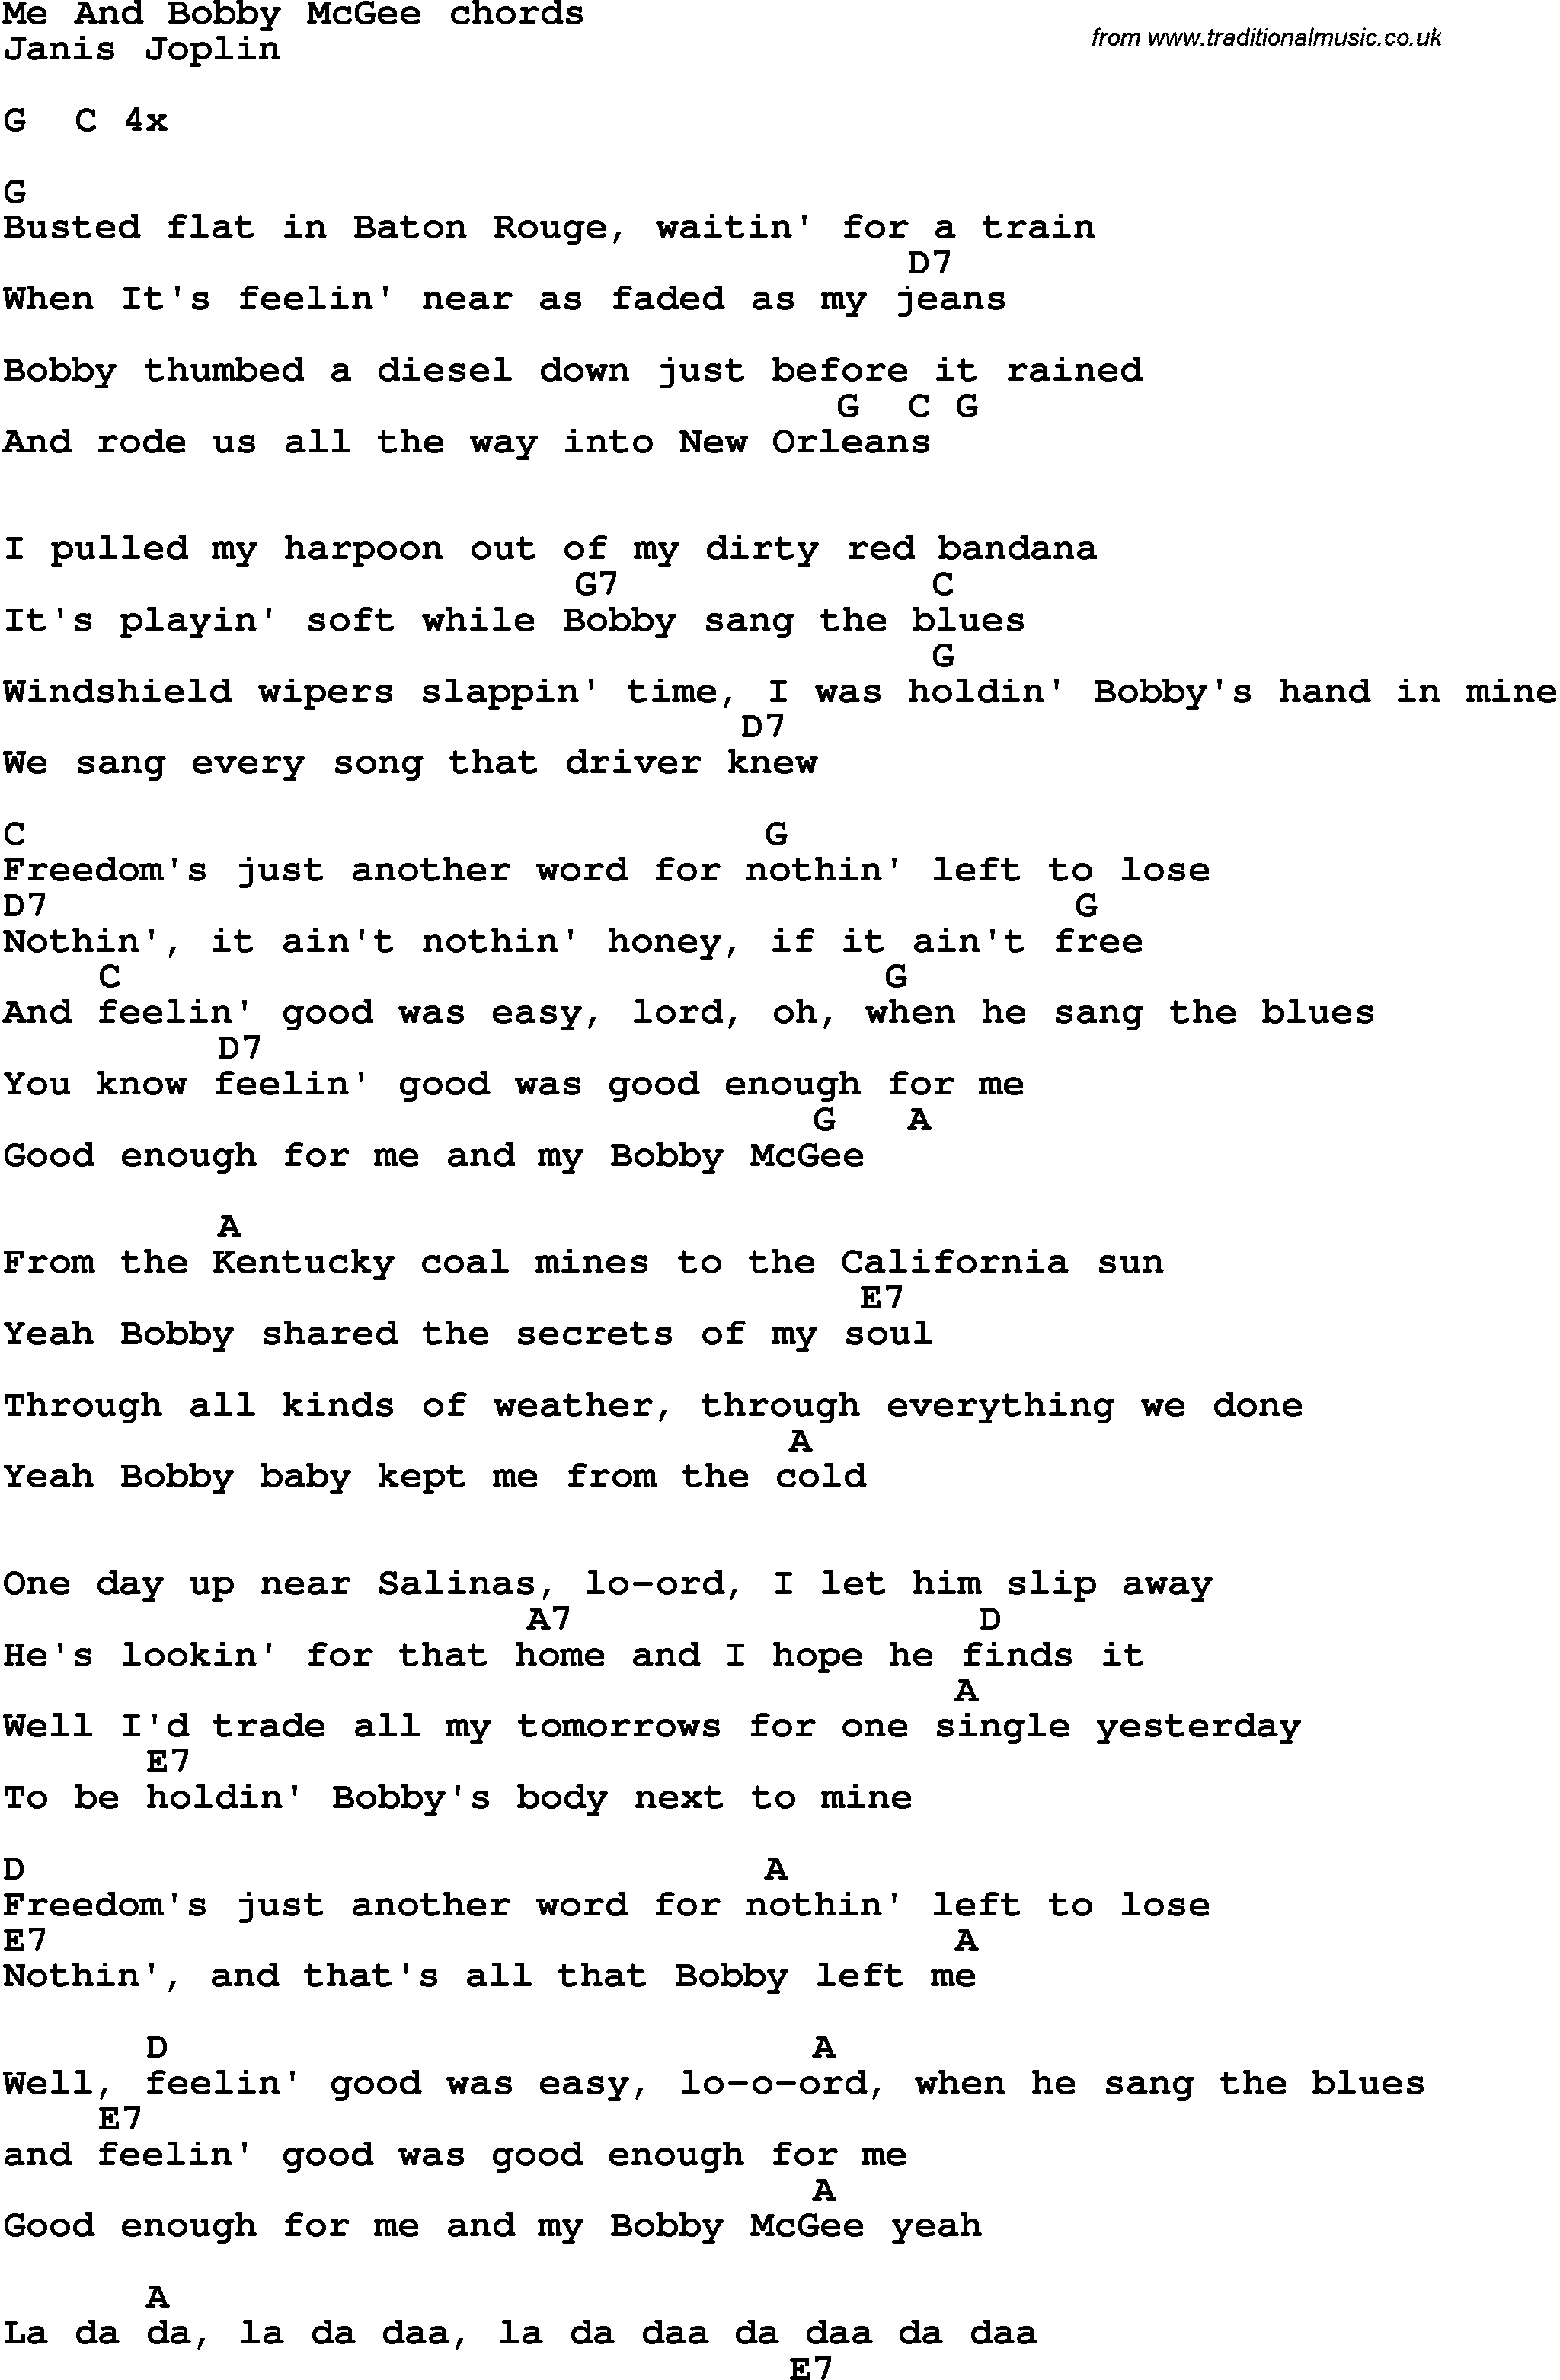 Song Lyrics with guitar chords for Me And Bobby Mcgee